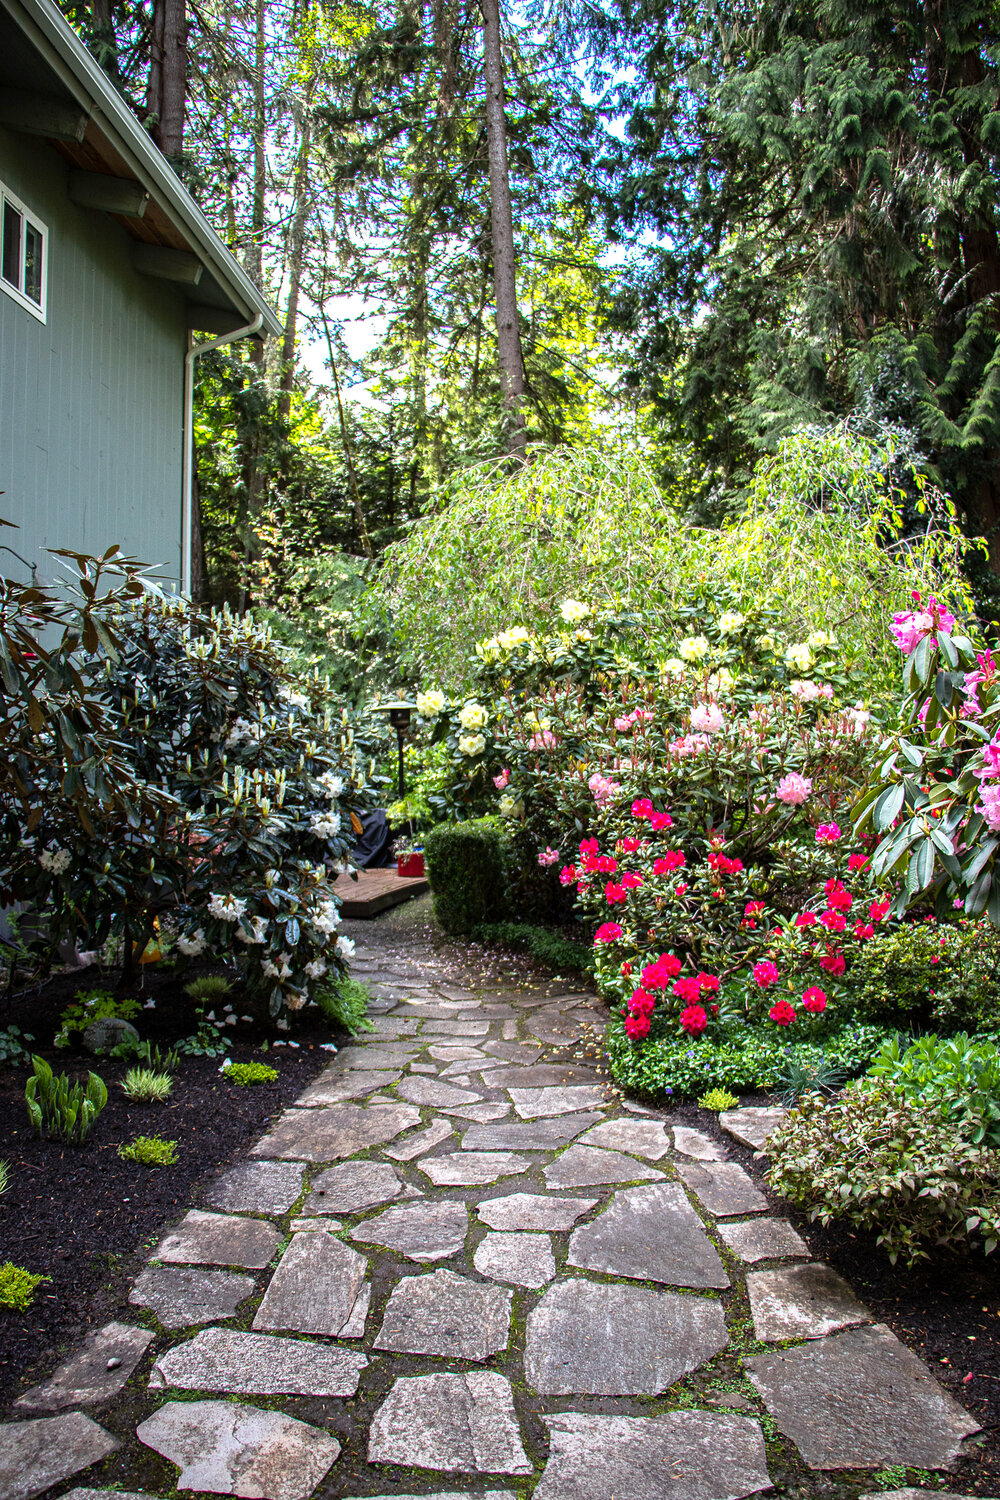 Consistency is key. In this landscape, rhododendrons provide structure throughout the landscape while the understory plants change depending on site conditions. Flagstone is used as the primary hardscape material.